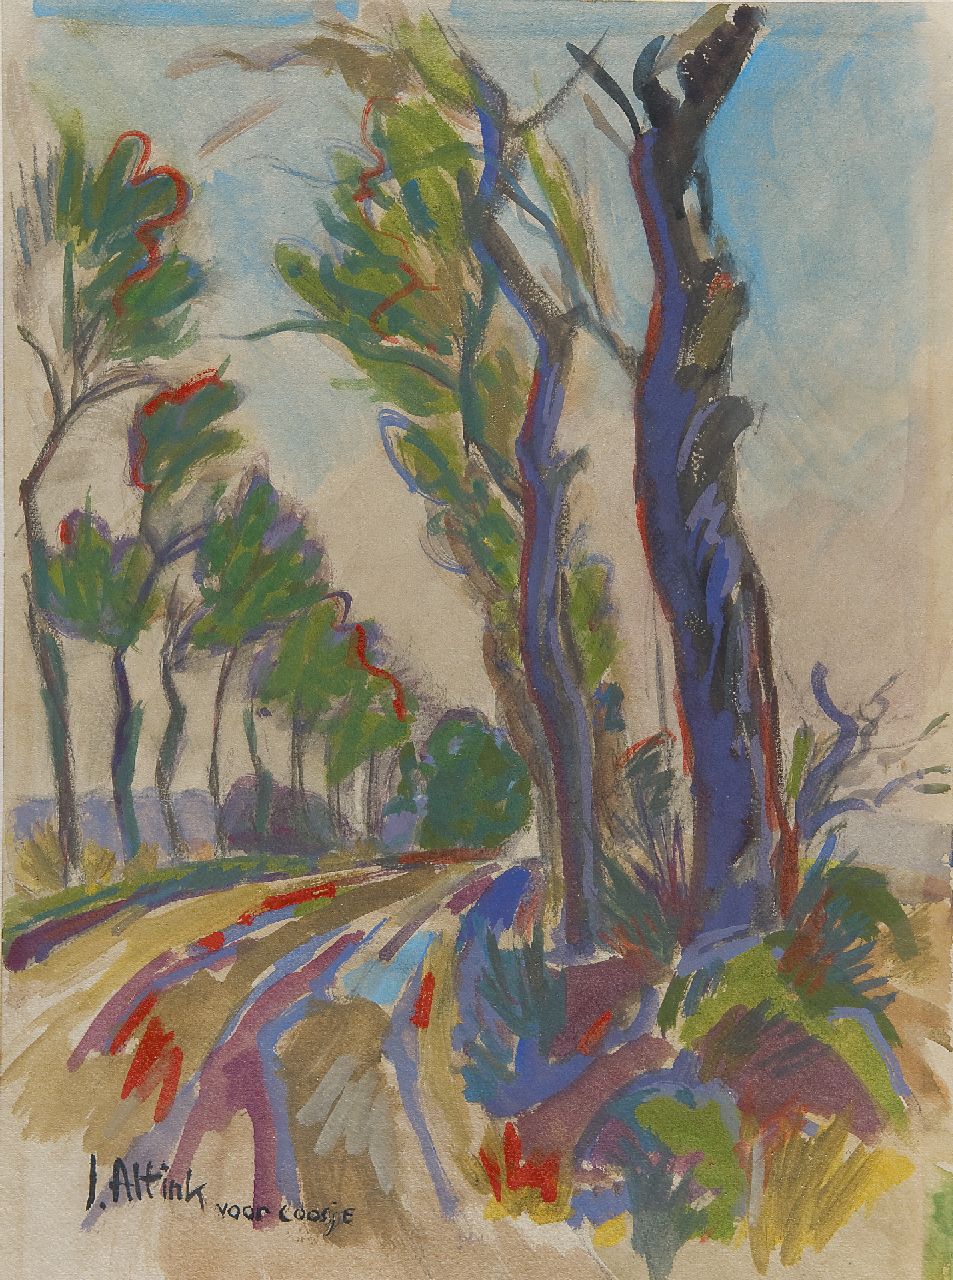 Altink J.  | Jan Altink, A country road with trees, Aquarell auf Papier 39,2 x 29,0 cm, signed l.l.